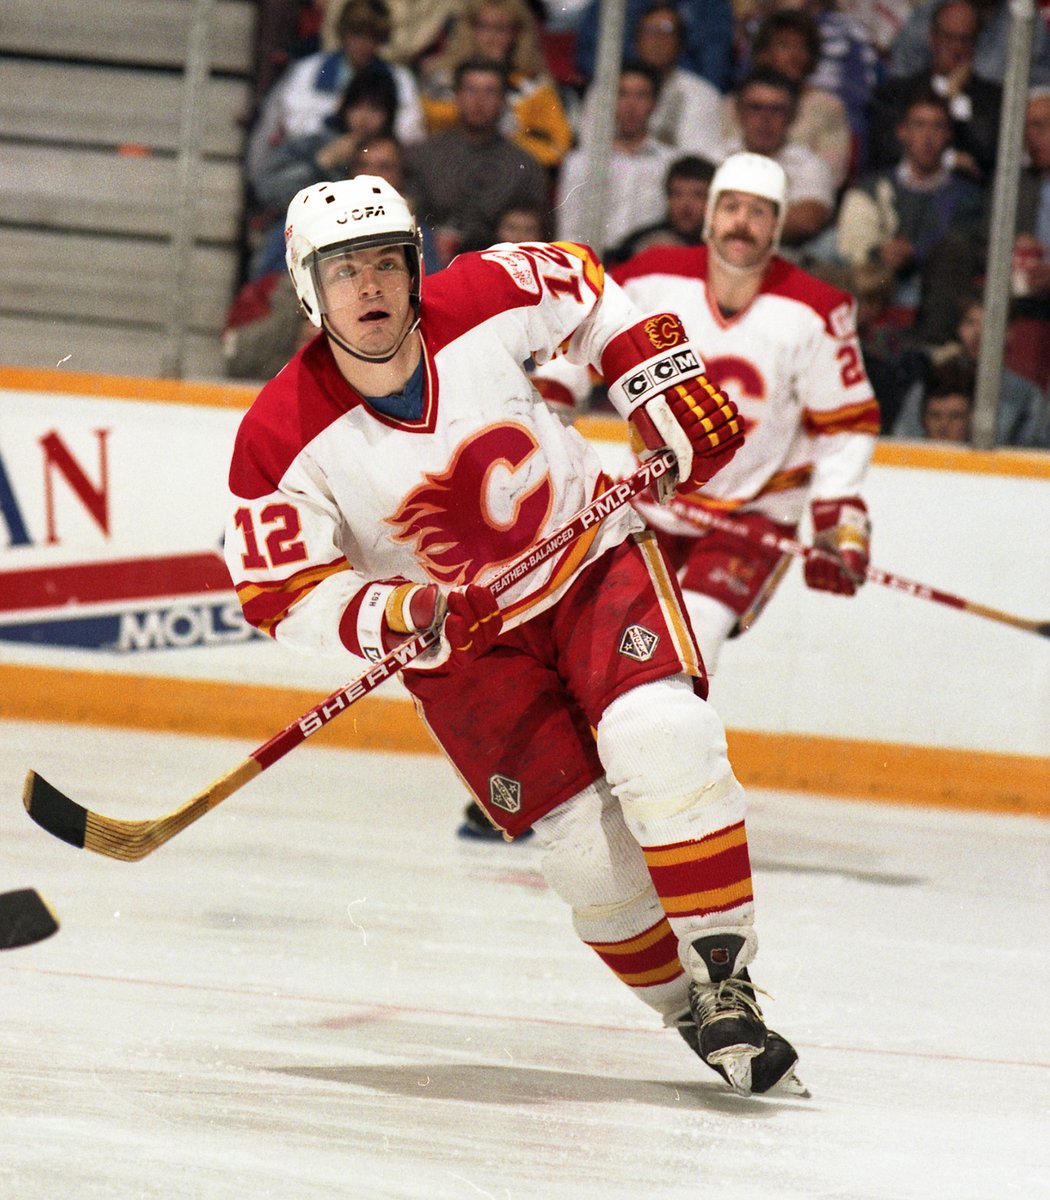 A couple of @HkanLoob snapshots from 1987-88 on #FlamesFlashbackFriday 🔥 Loob had a monster '87-88 season, scoring 50 goals (becoming the first - and only - Swedish player to reach that mark), 56 assists, 106 points, and ending the regular season with a +41 +/- rating 🤯